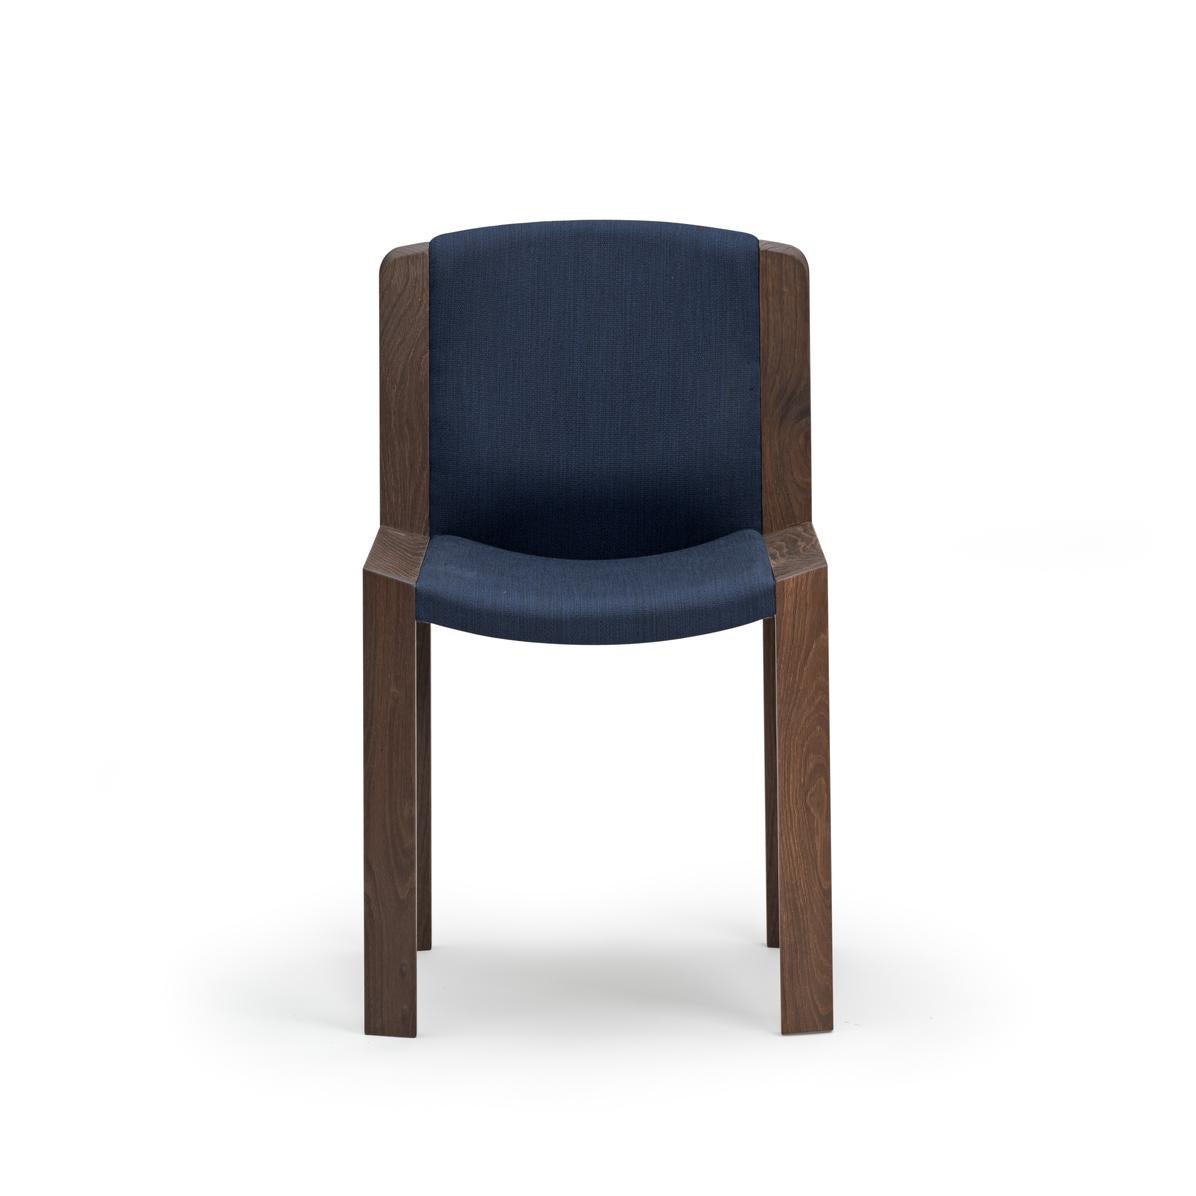 Joe Colombo 'Chair 300' Wood and Sørensen Leather Chair by Karakter For Sale 7